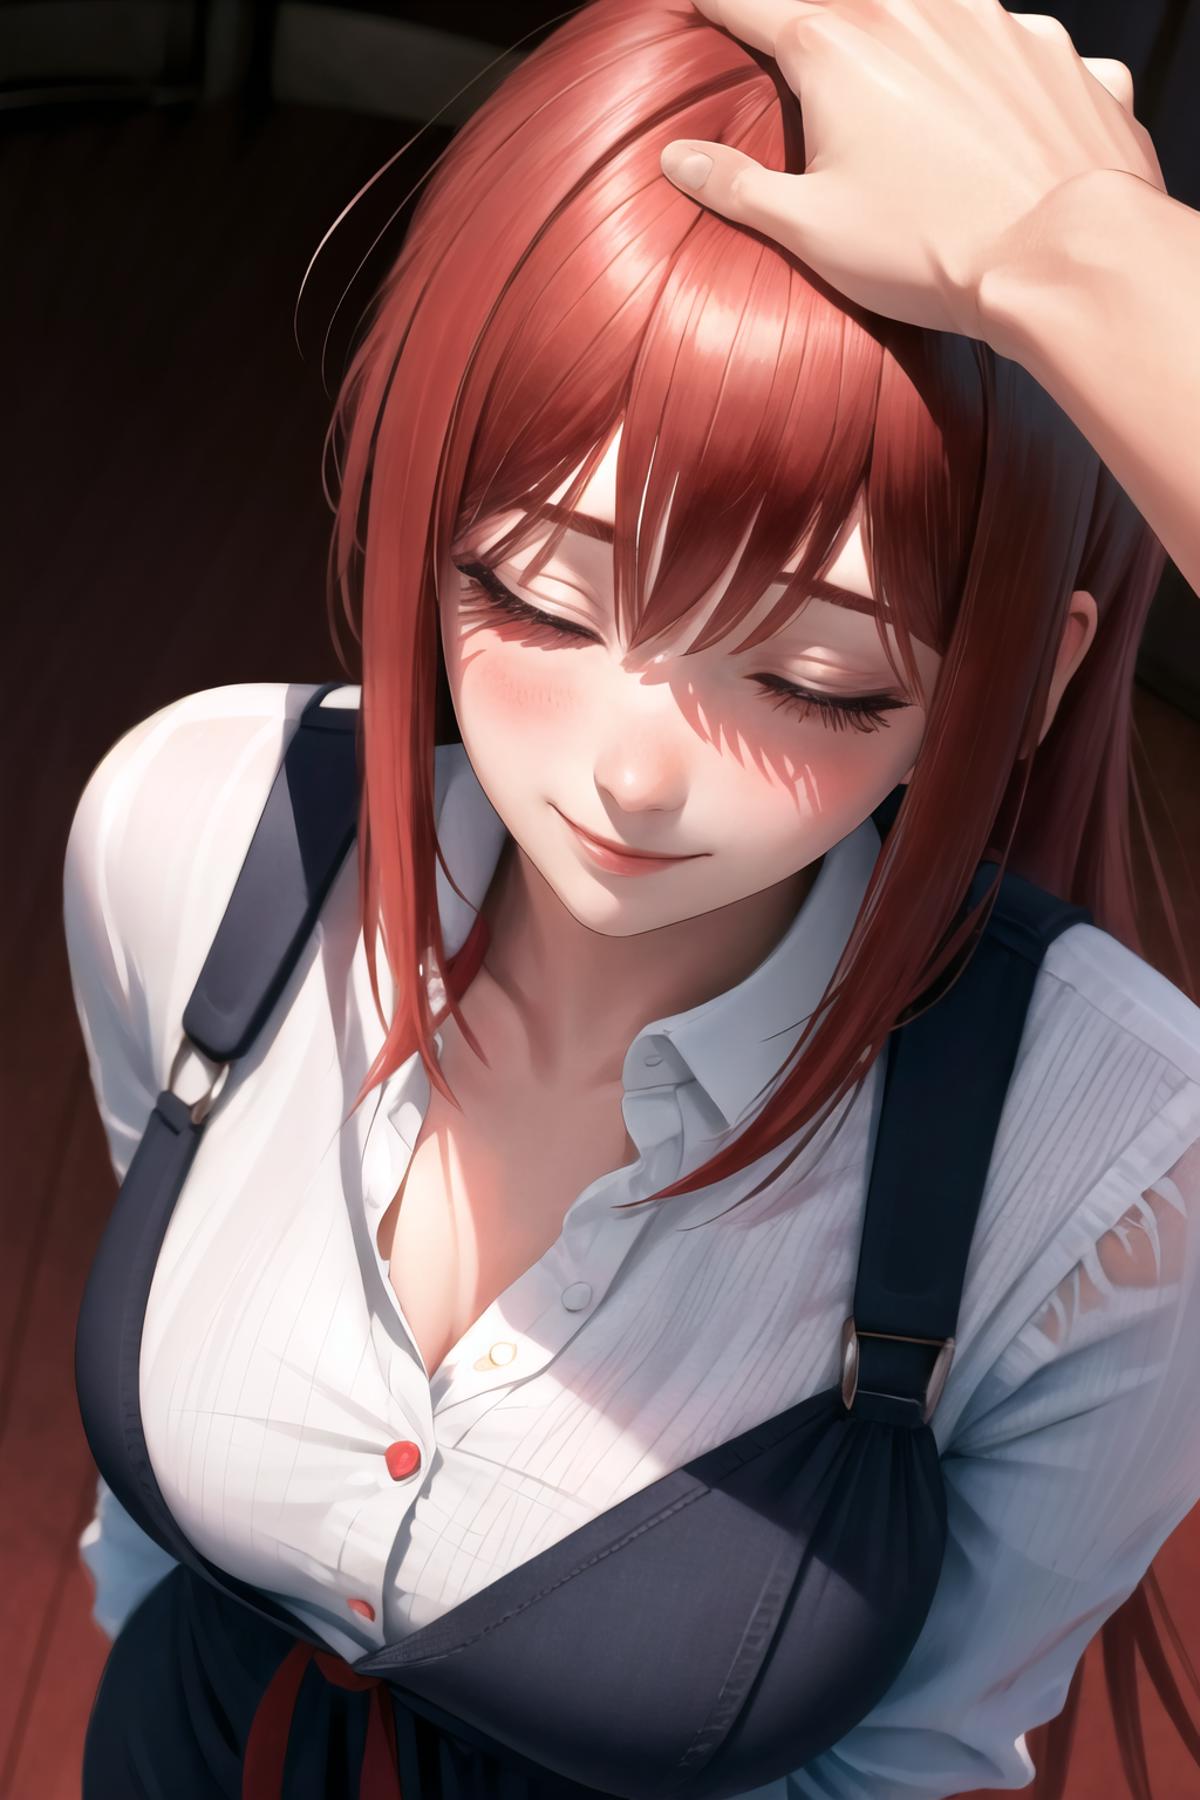 Anime girl with red hair and a white shirt.